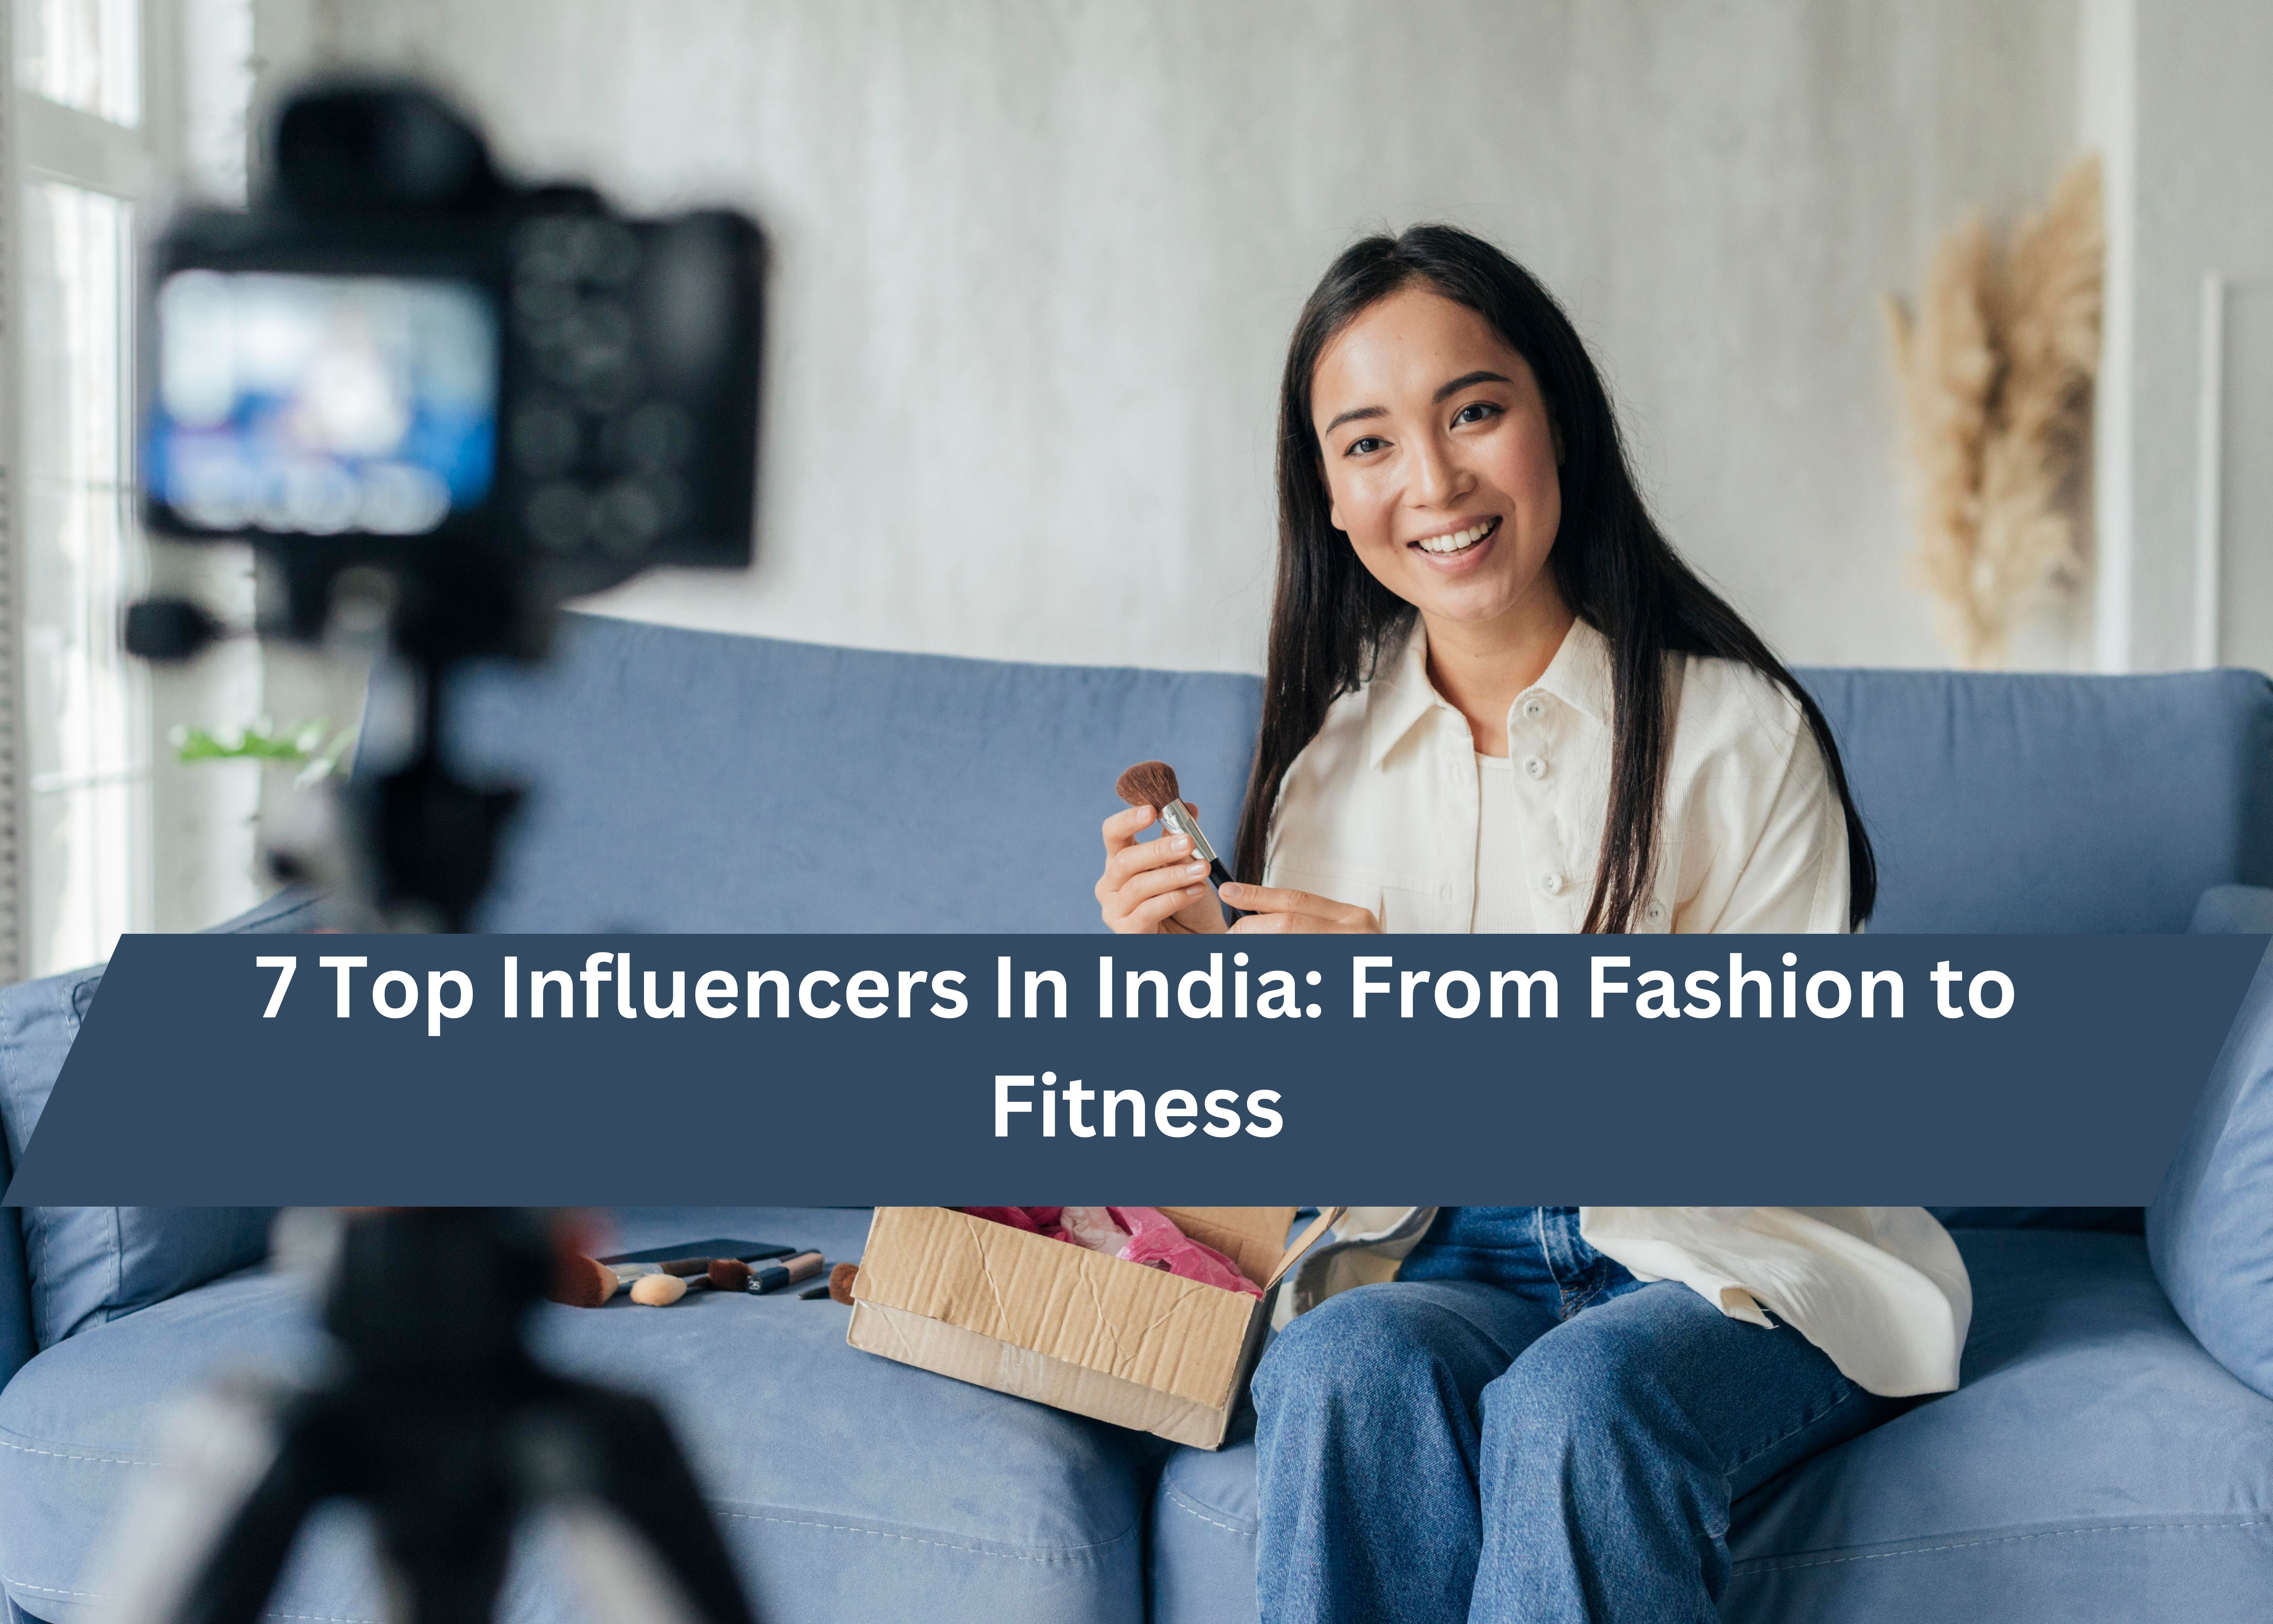 7 Top Influencers In India From Fashion to Fitness